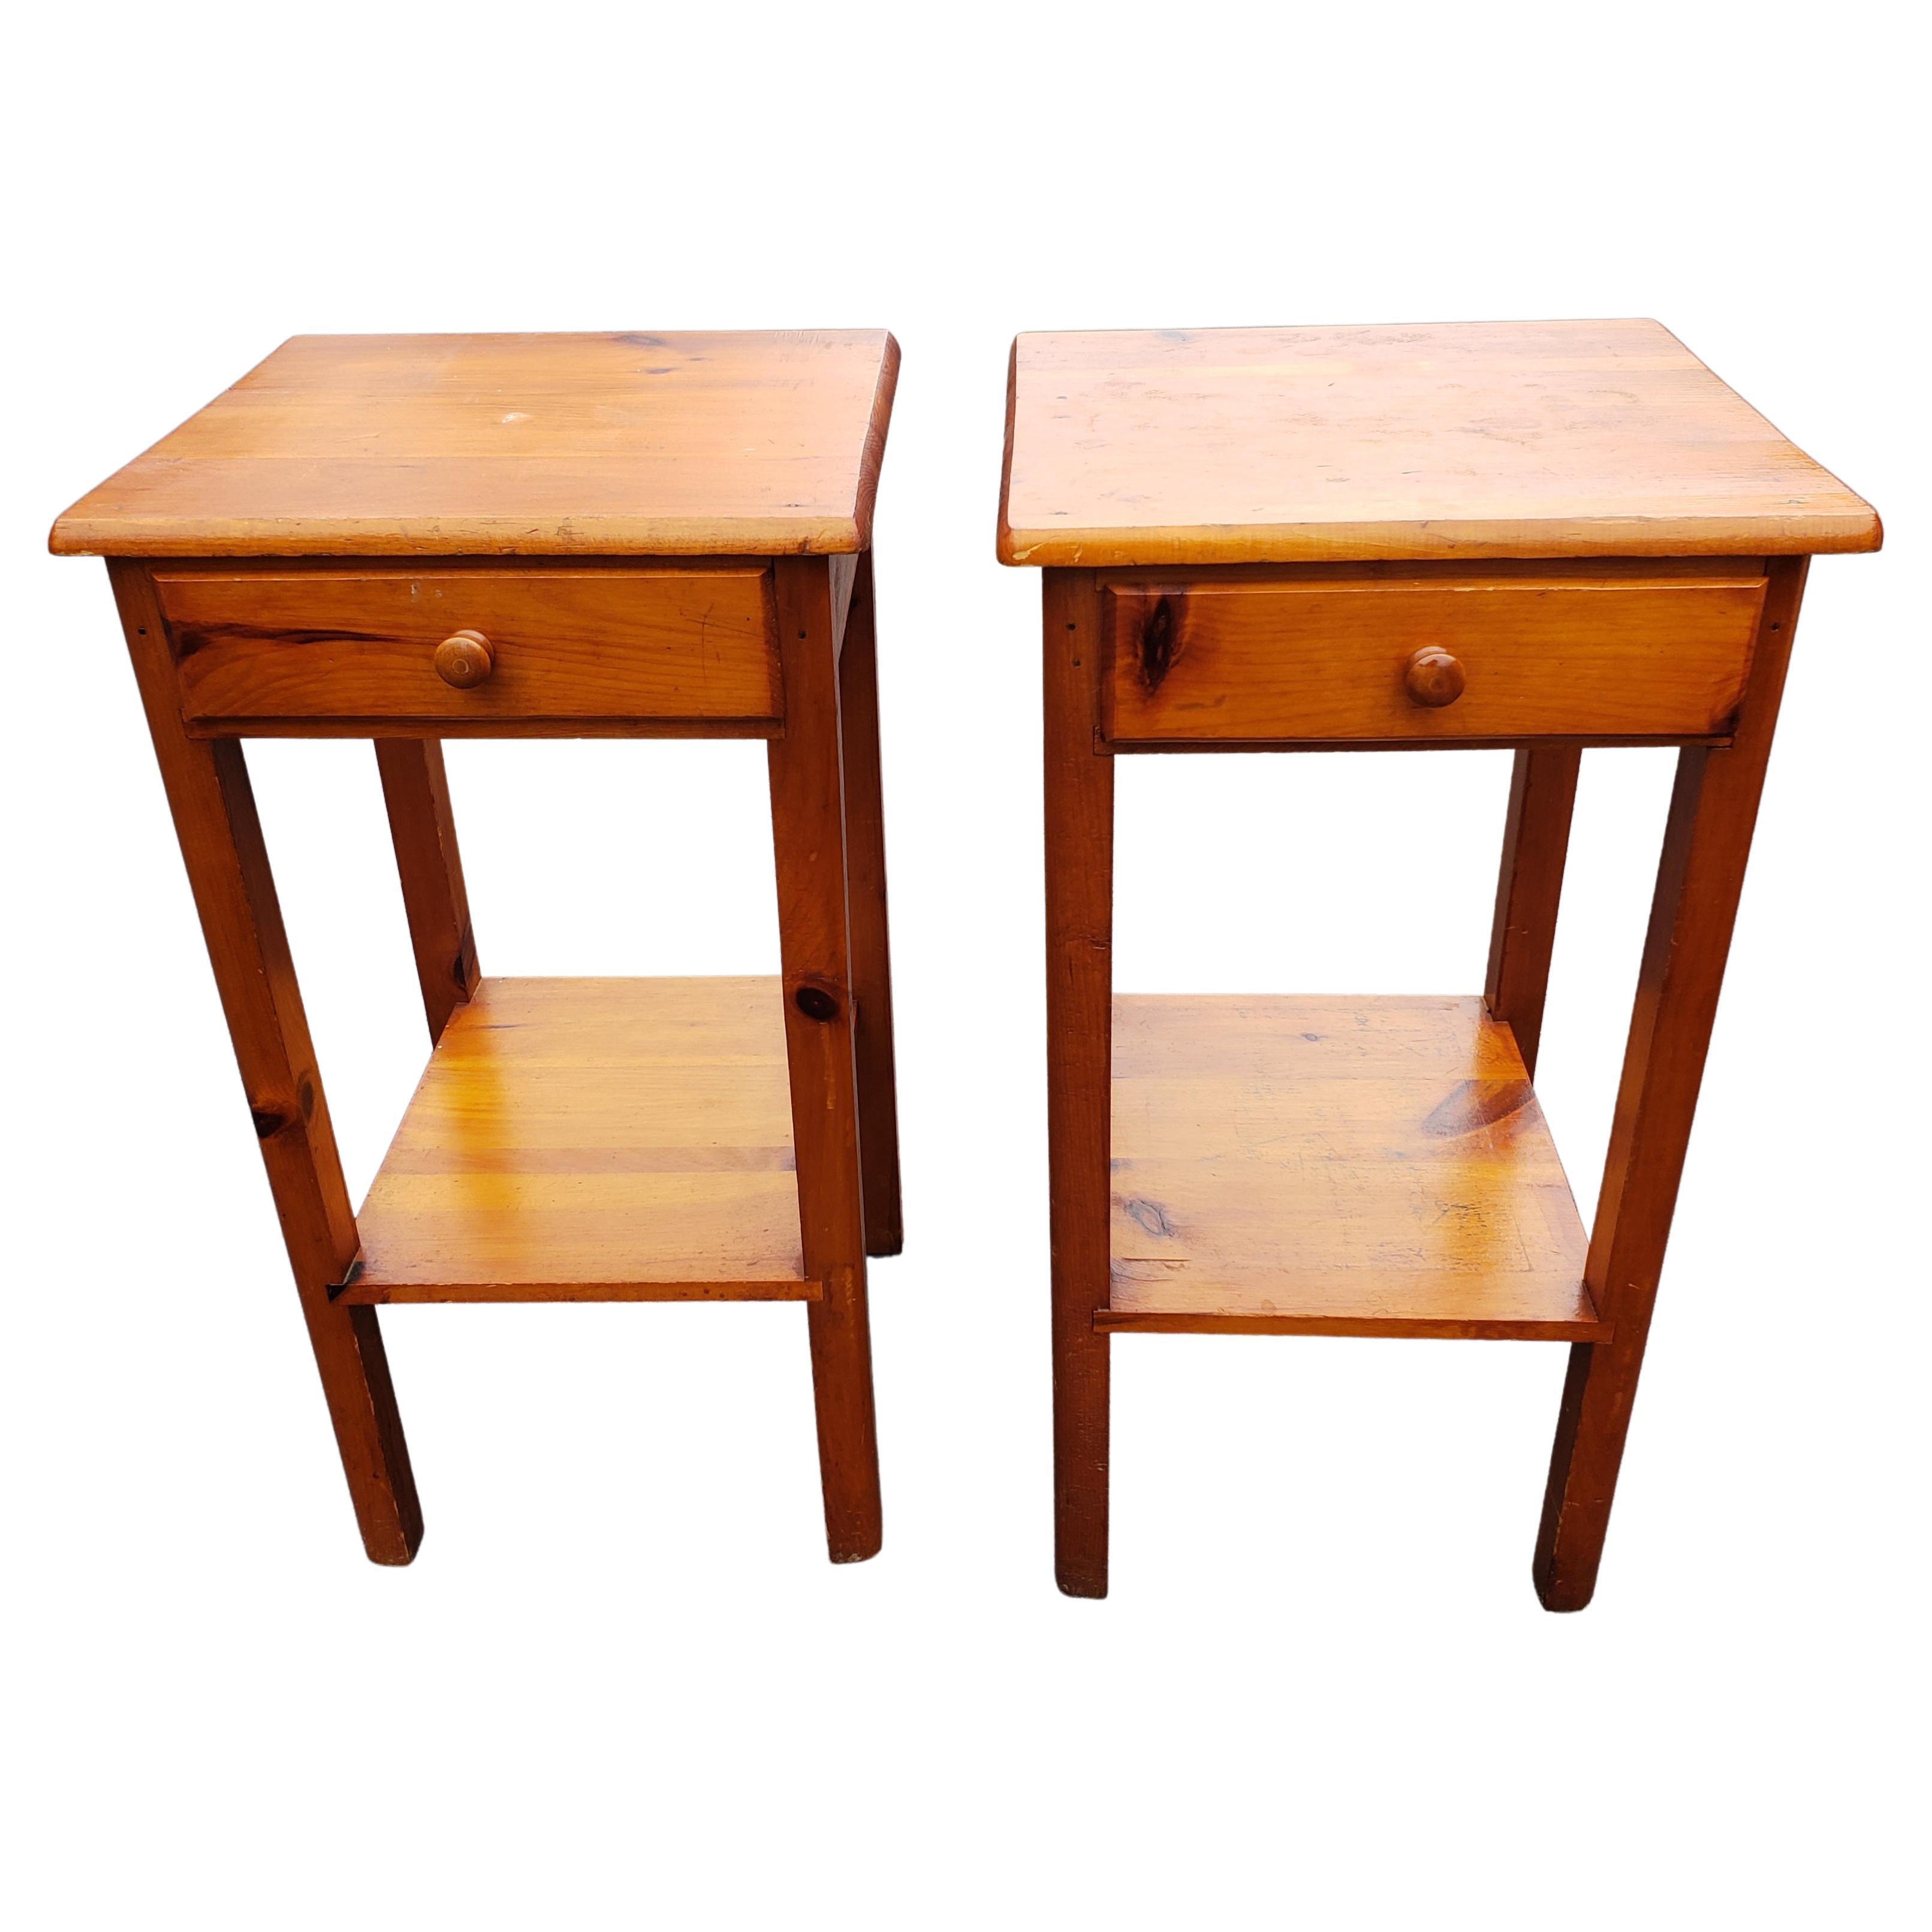 Vintage Solid Pine Tables, Sides or Nightstands, Circa 1970s, a Pair